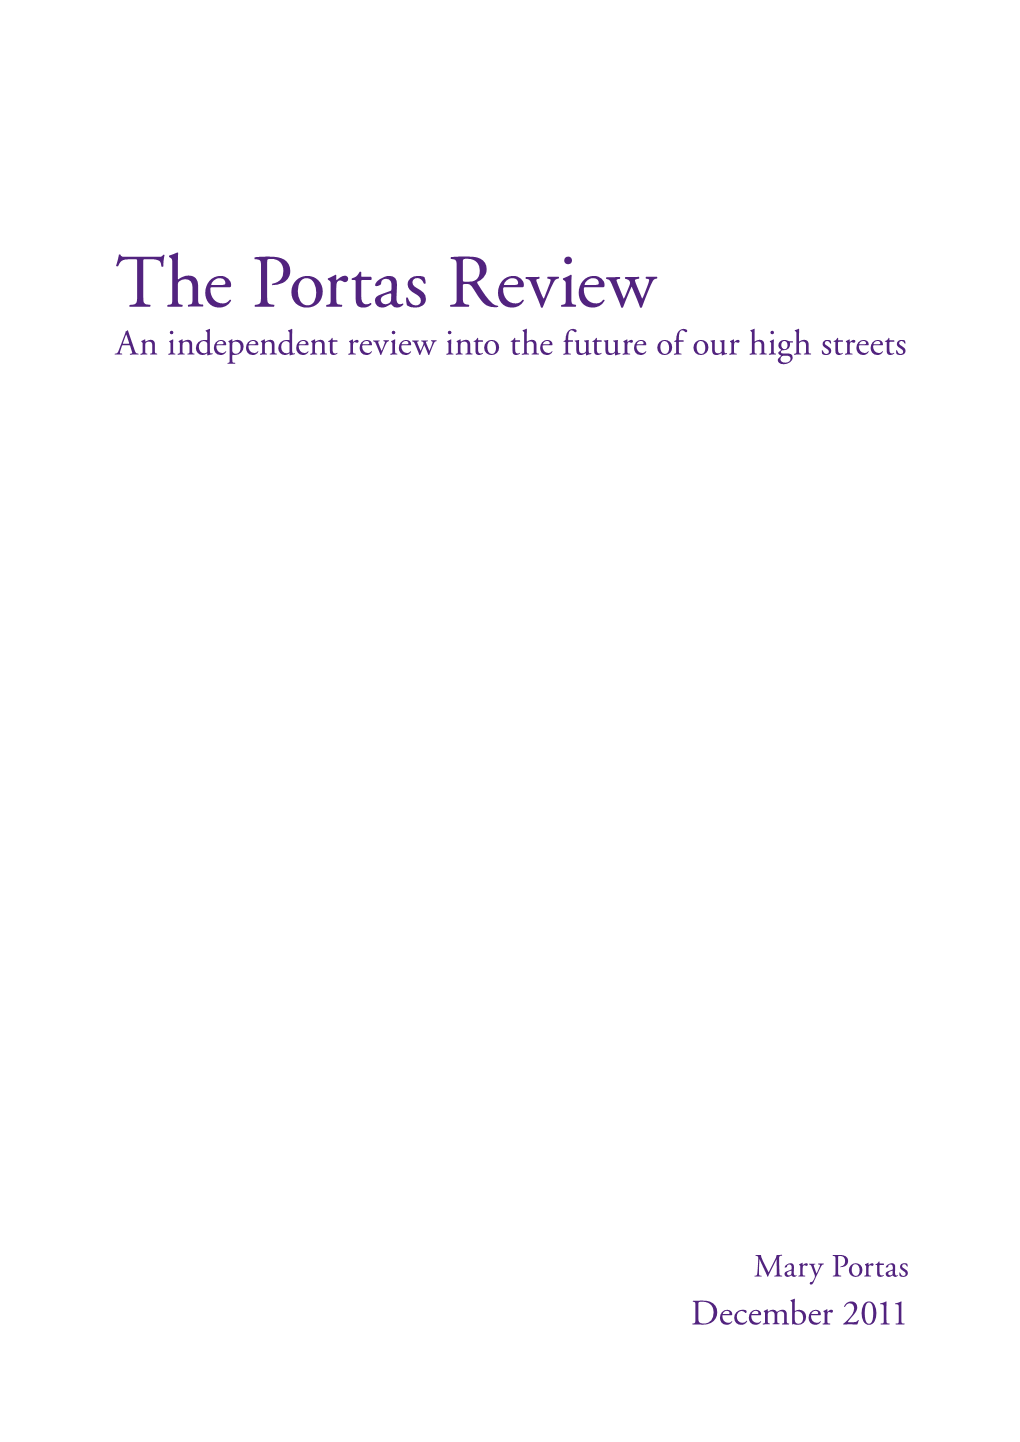 The Portas Review: an Independent Review Into the Future of Our High Streets